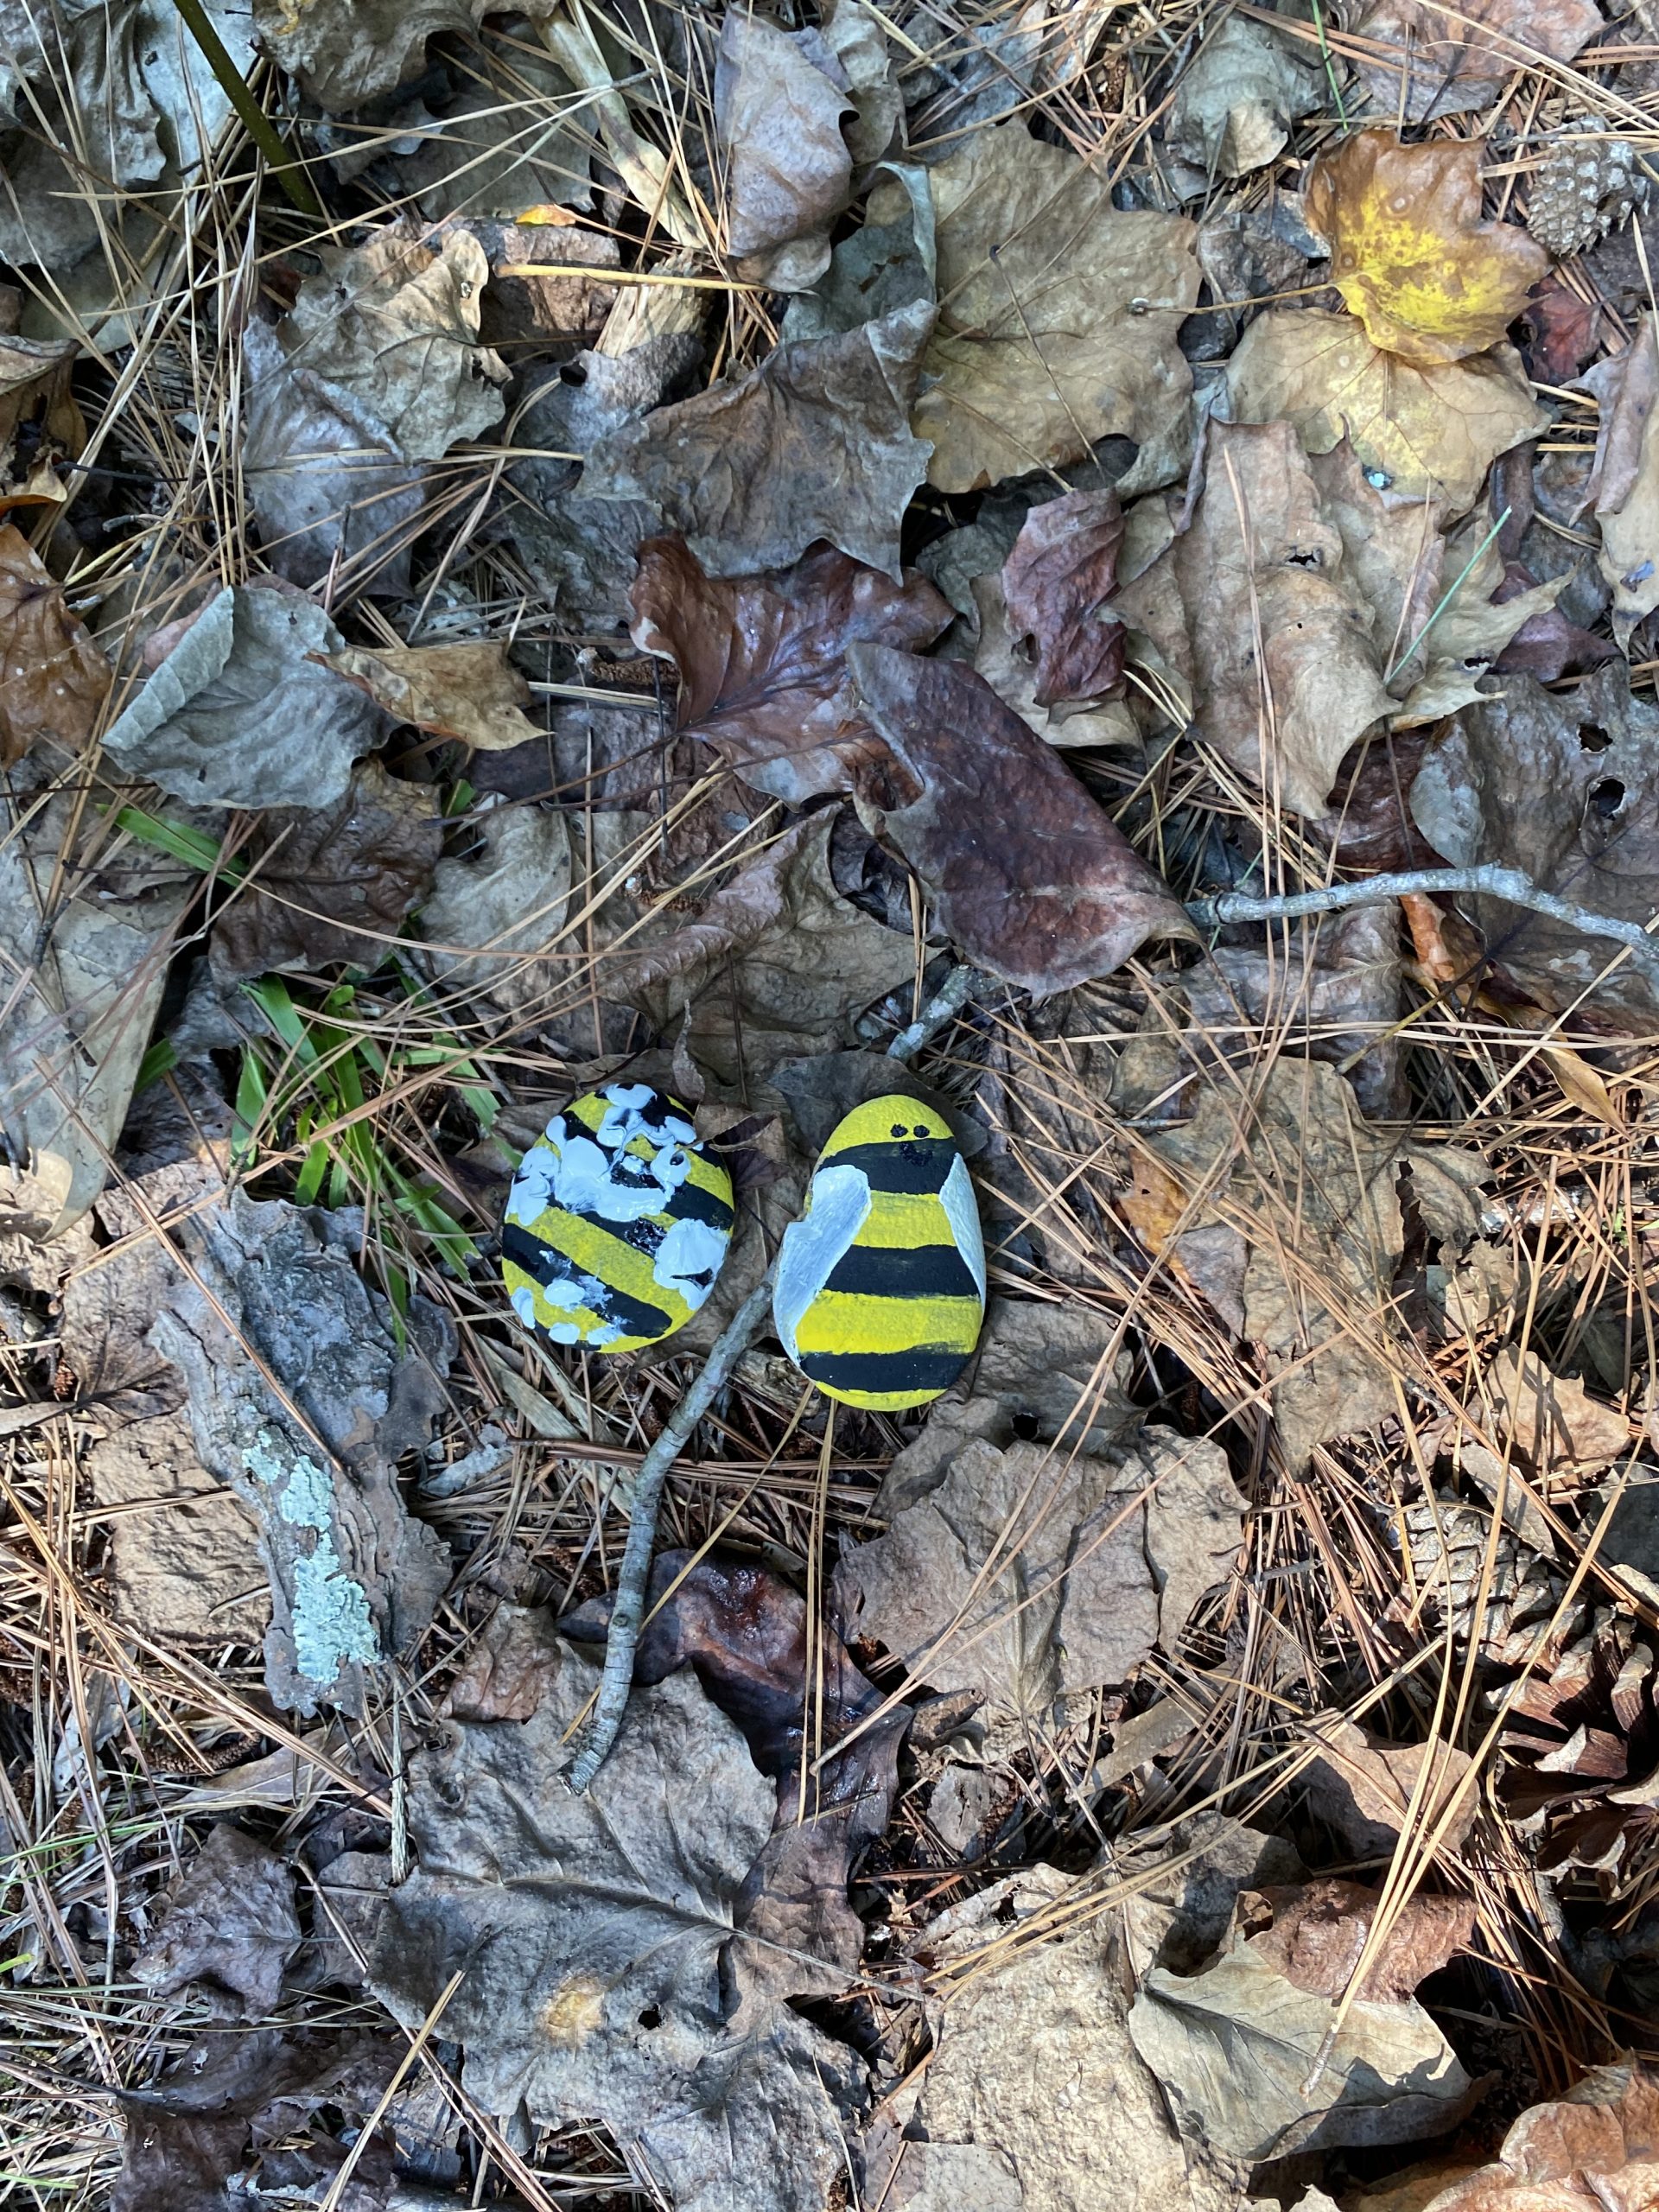 Two rocks painted like bees